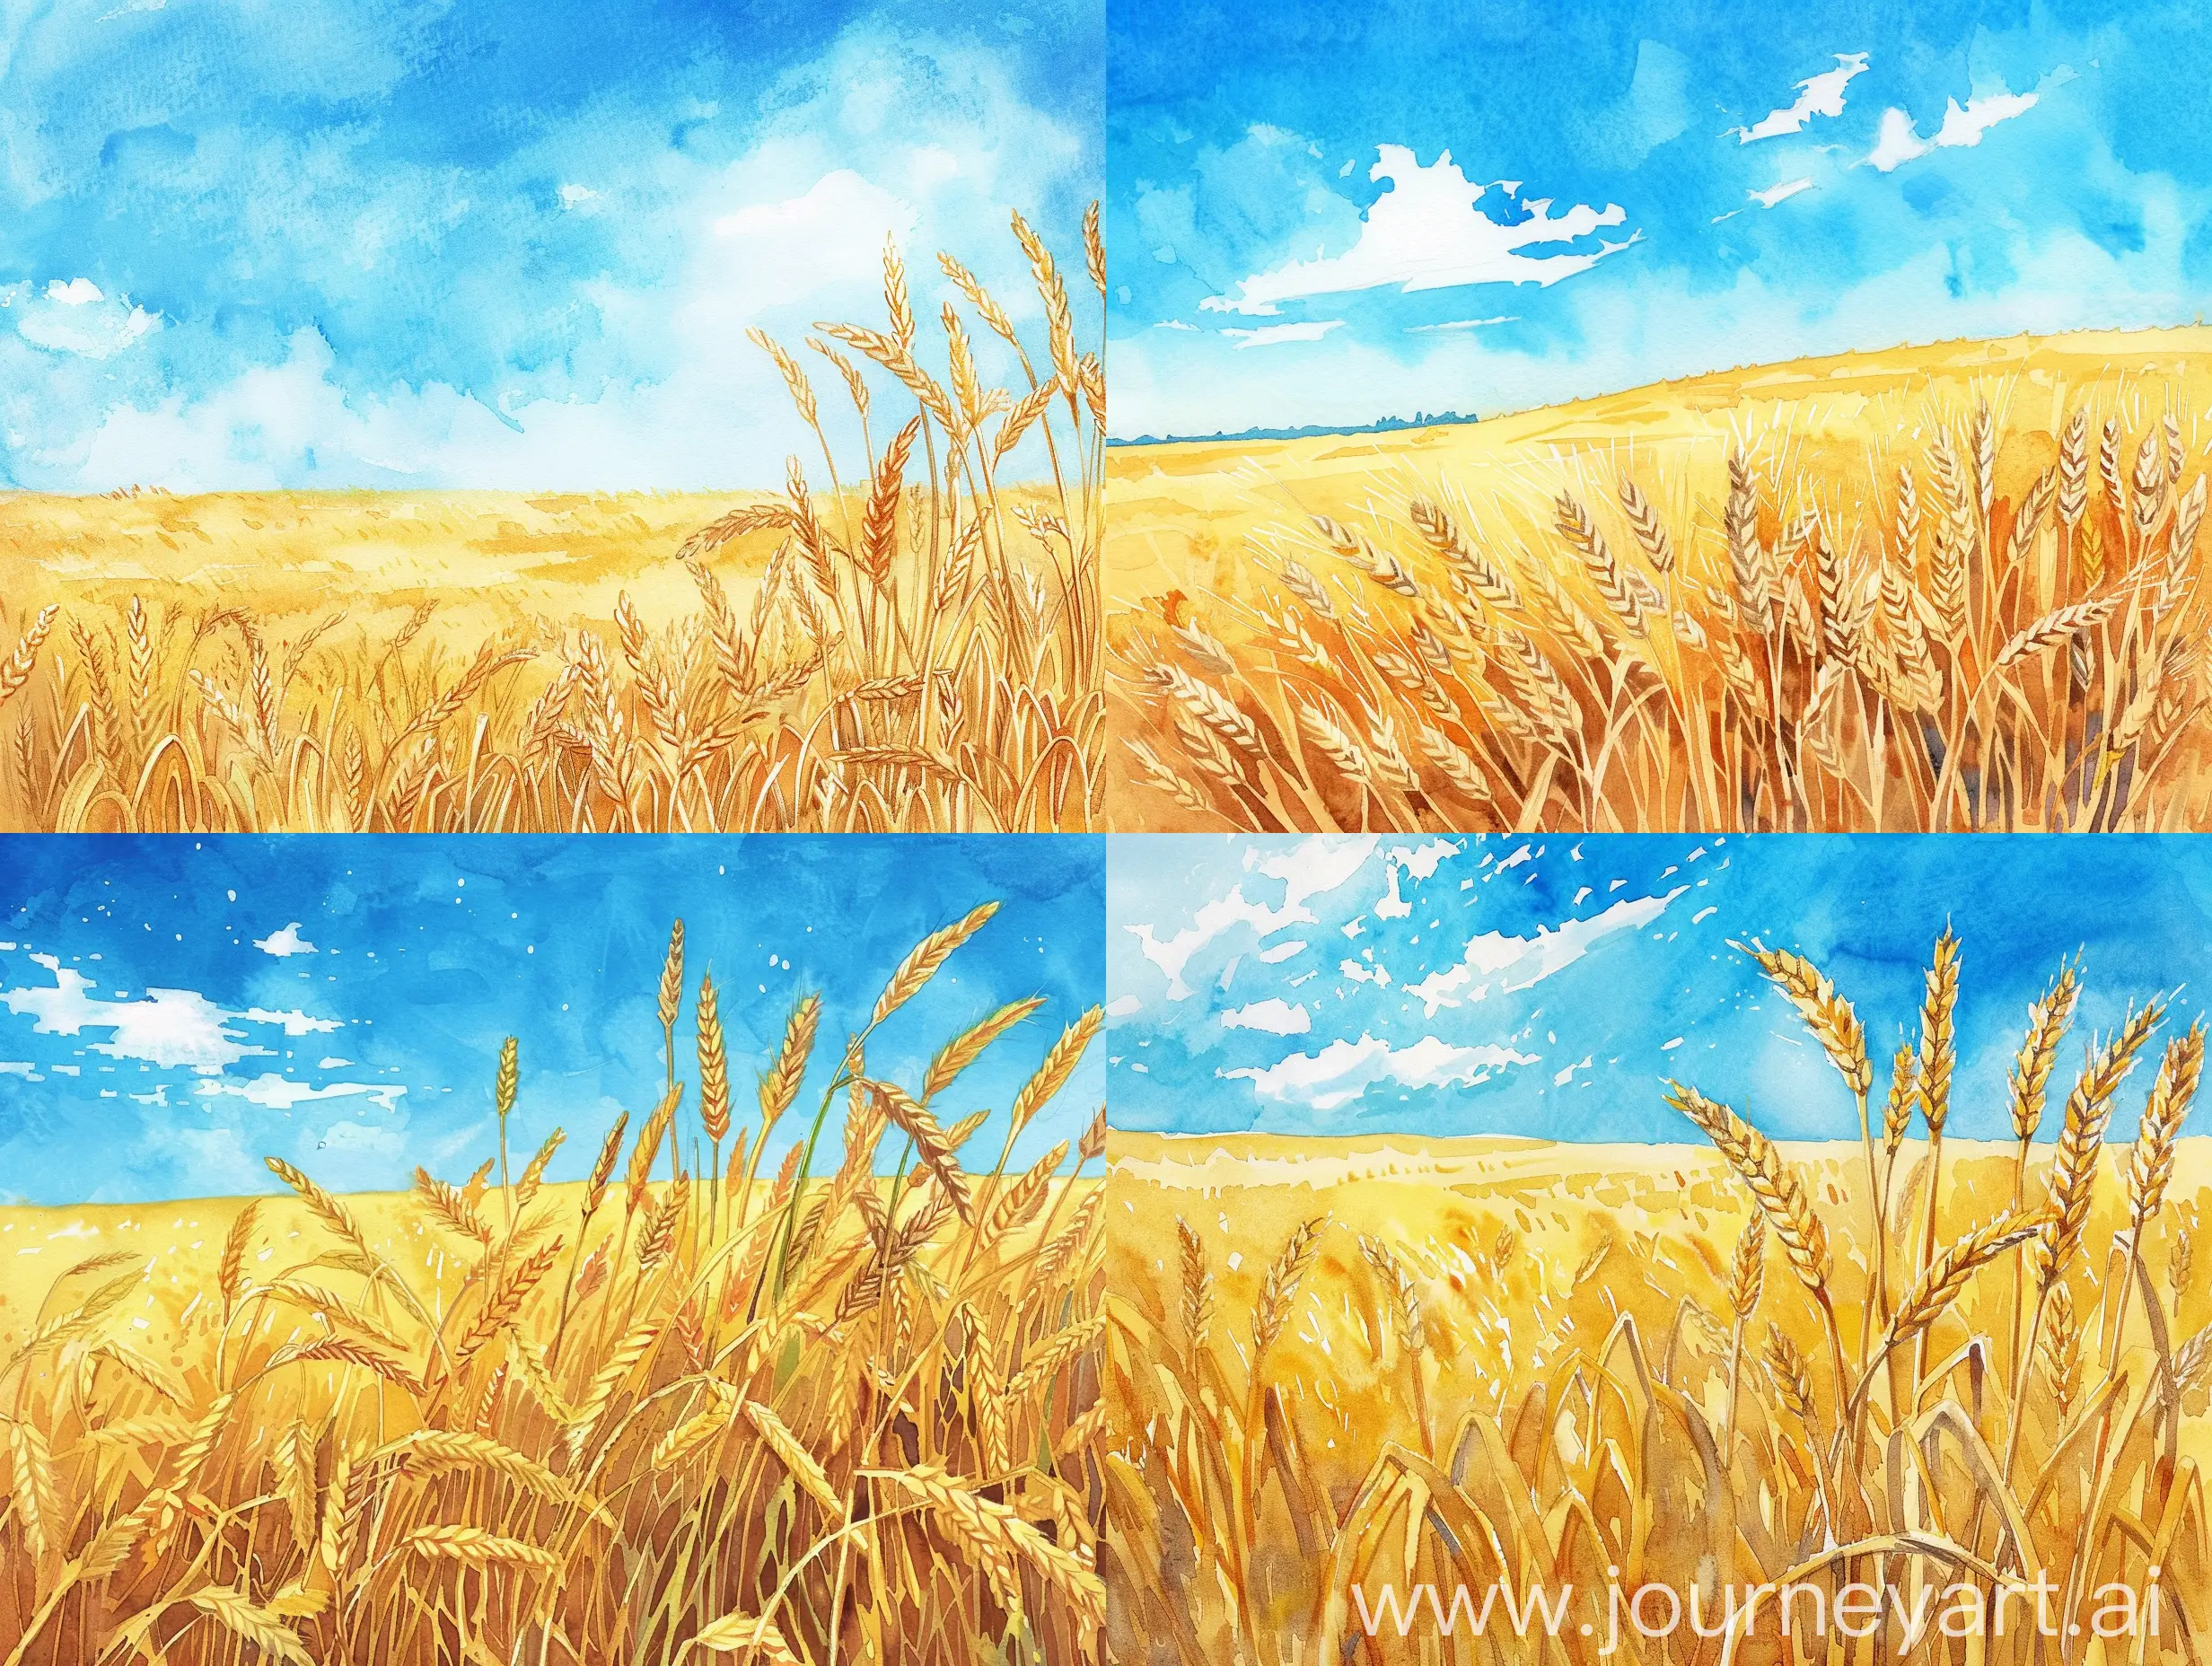 Sunny-Summer-Day-Golden-Wheat-Field-and-Blue-Sky-Landscape